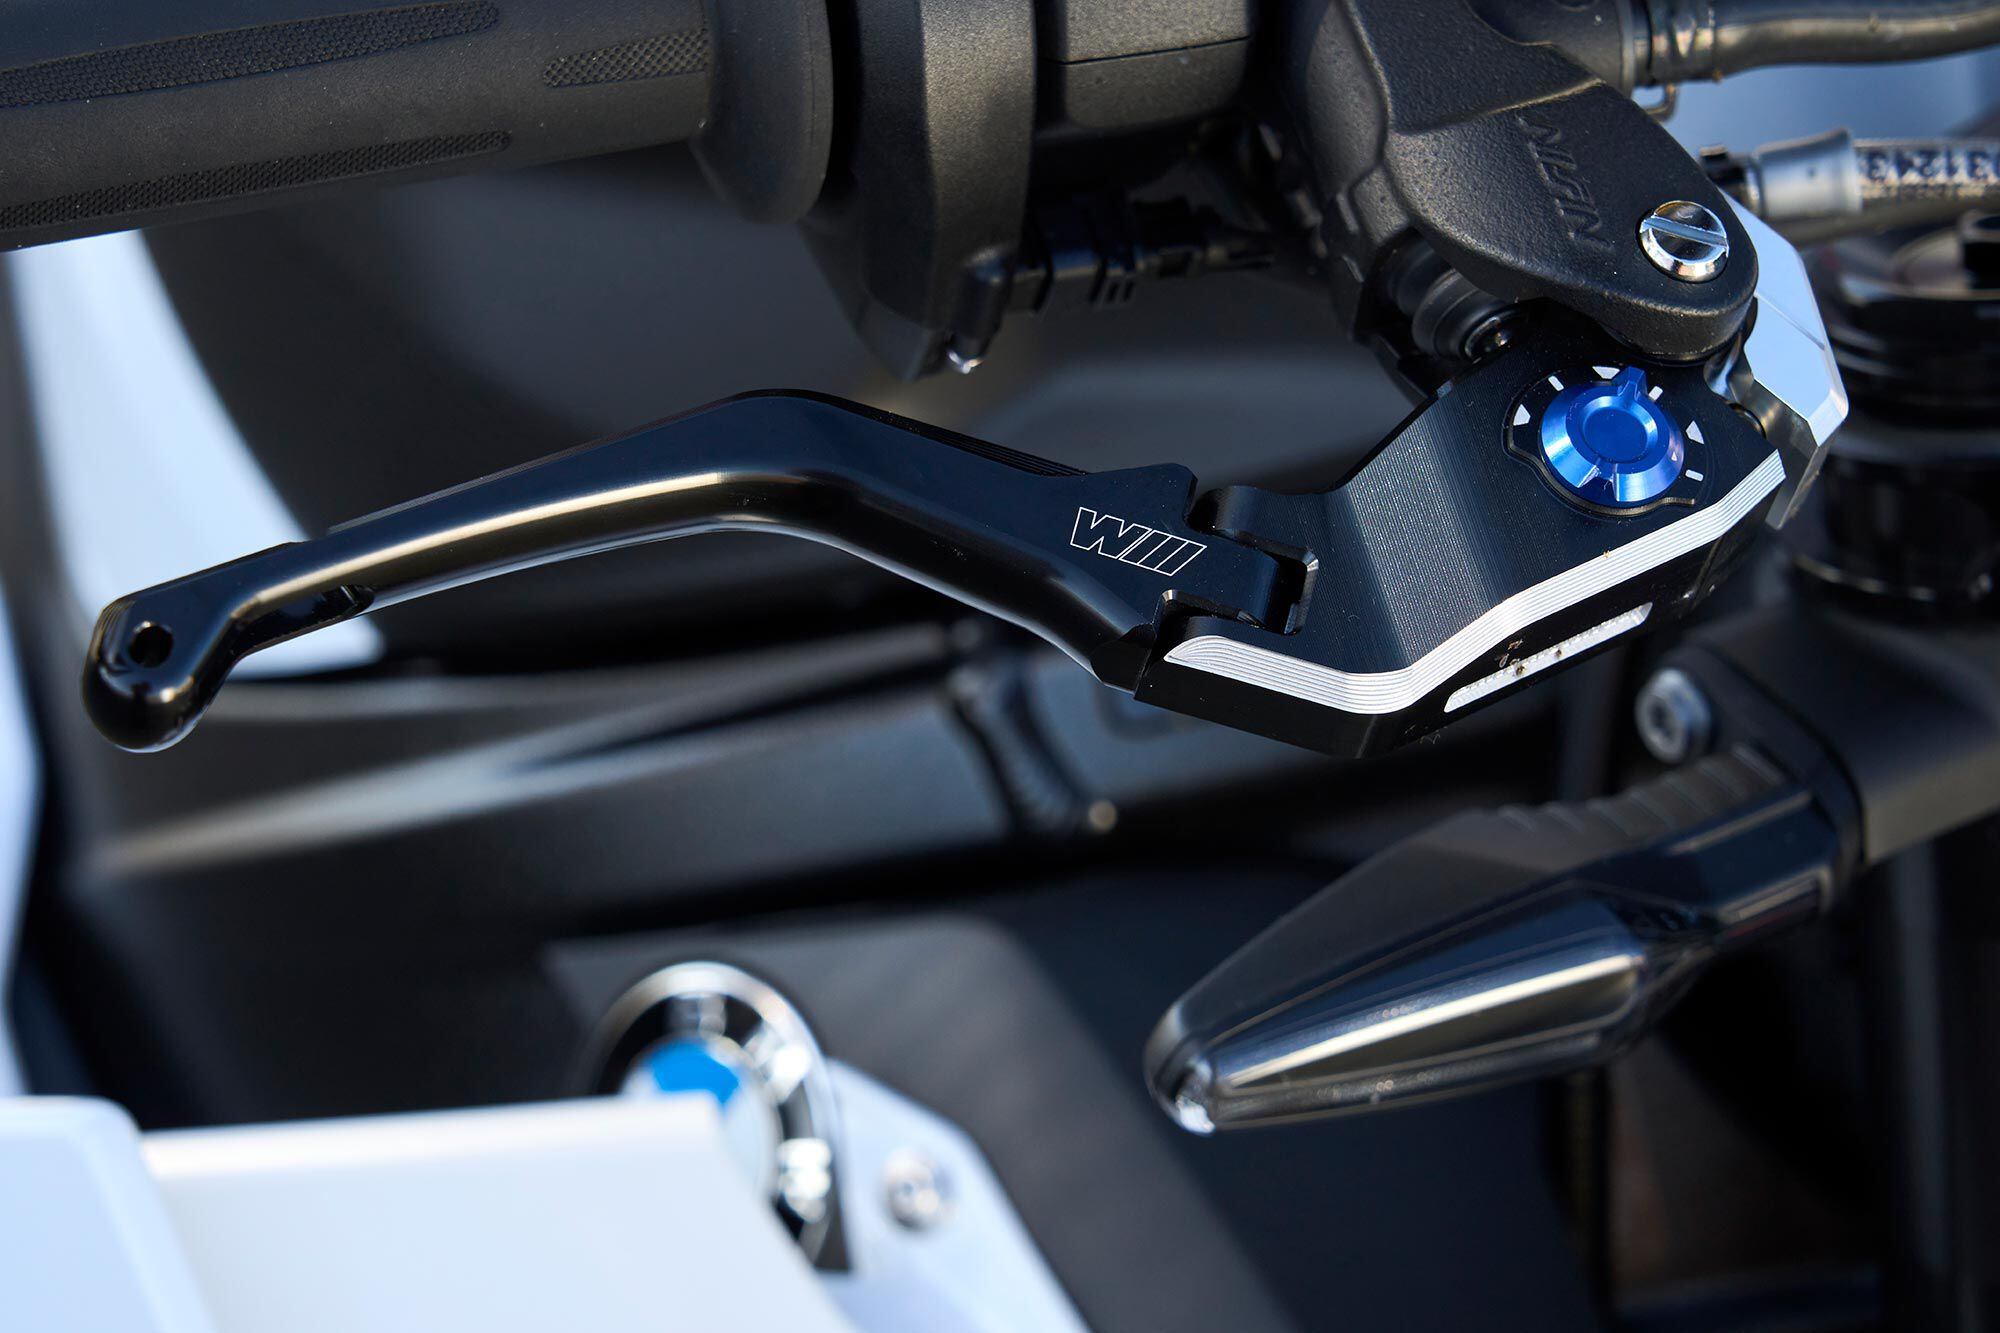 Standard on the M 1000 R are these beautiful billet aluminum pivoting levers.